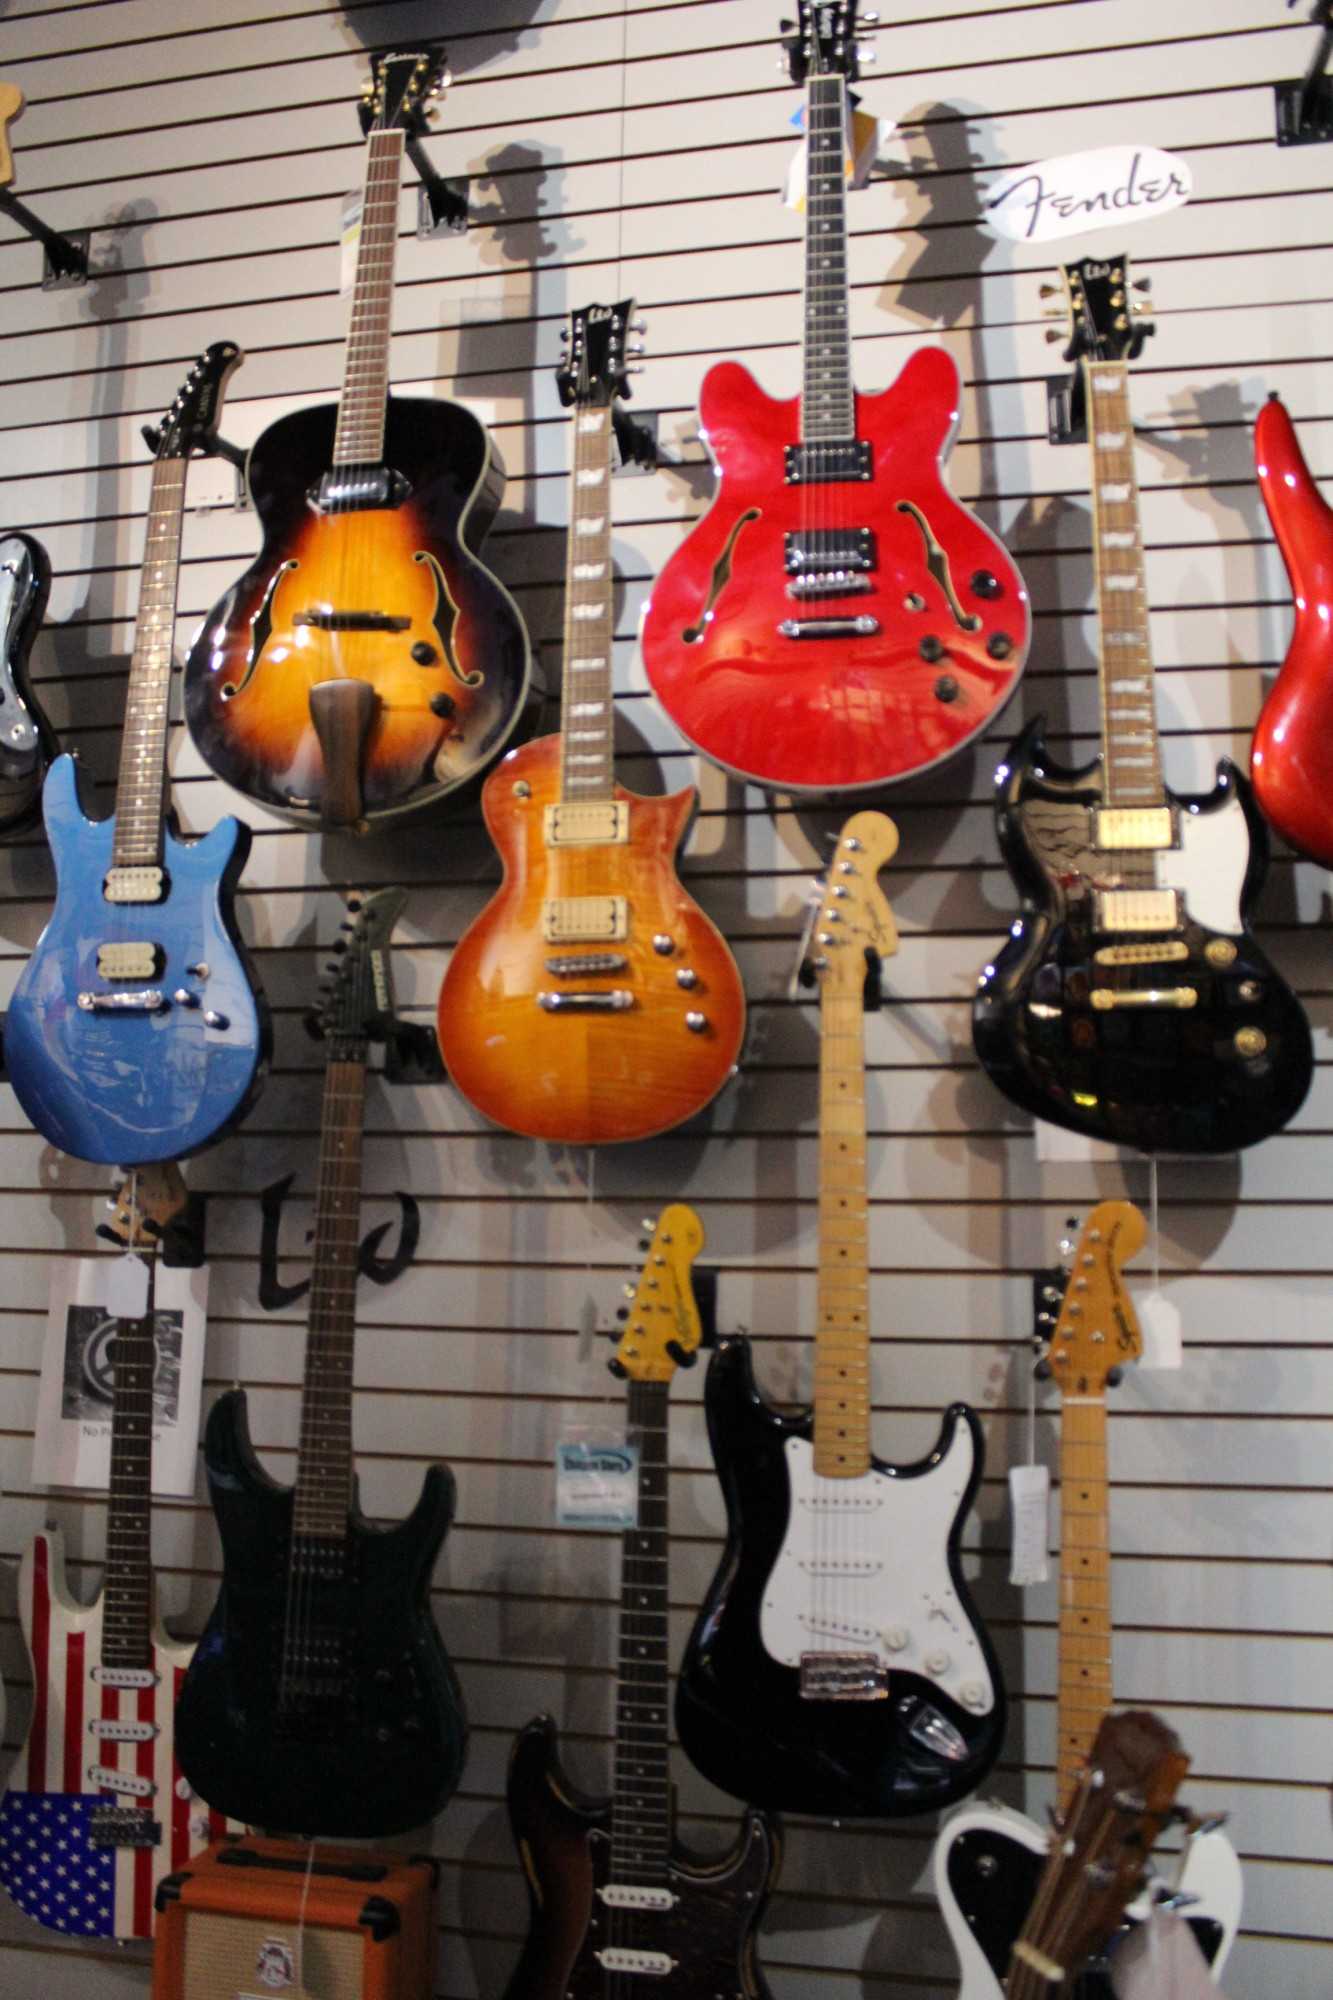 Different brands of electric guitars such as Vintage, Ibanez, and Fender.